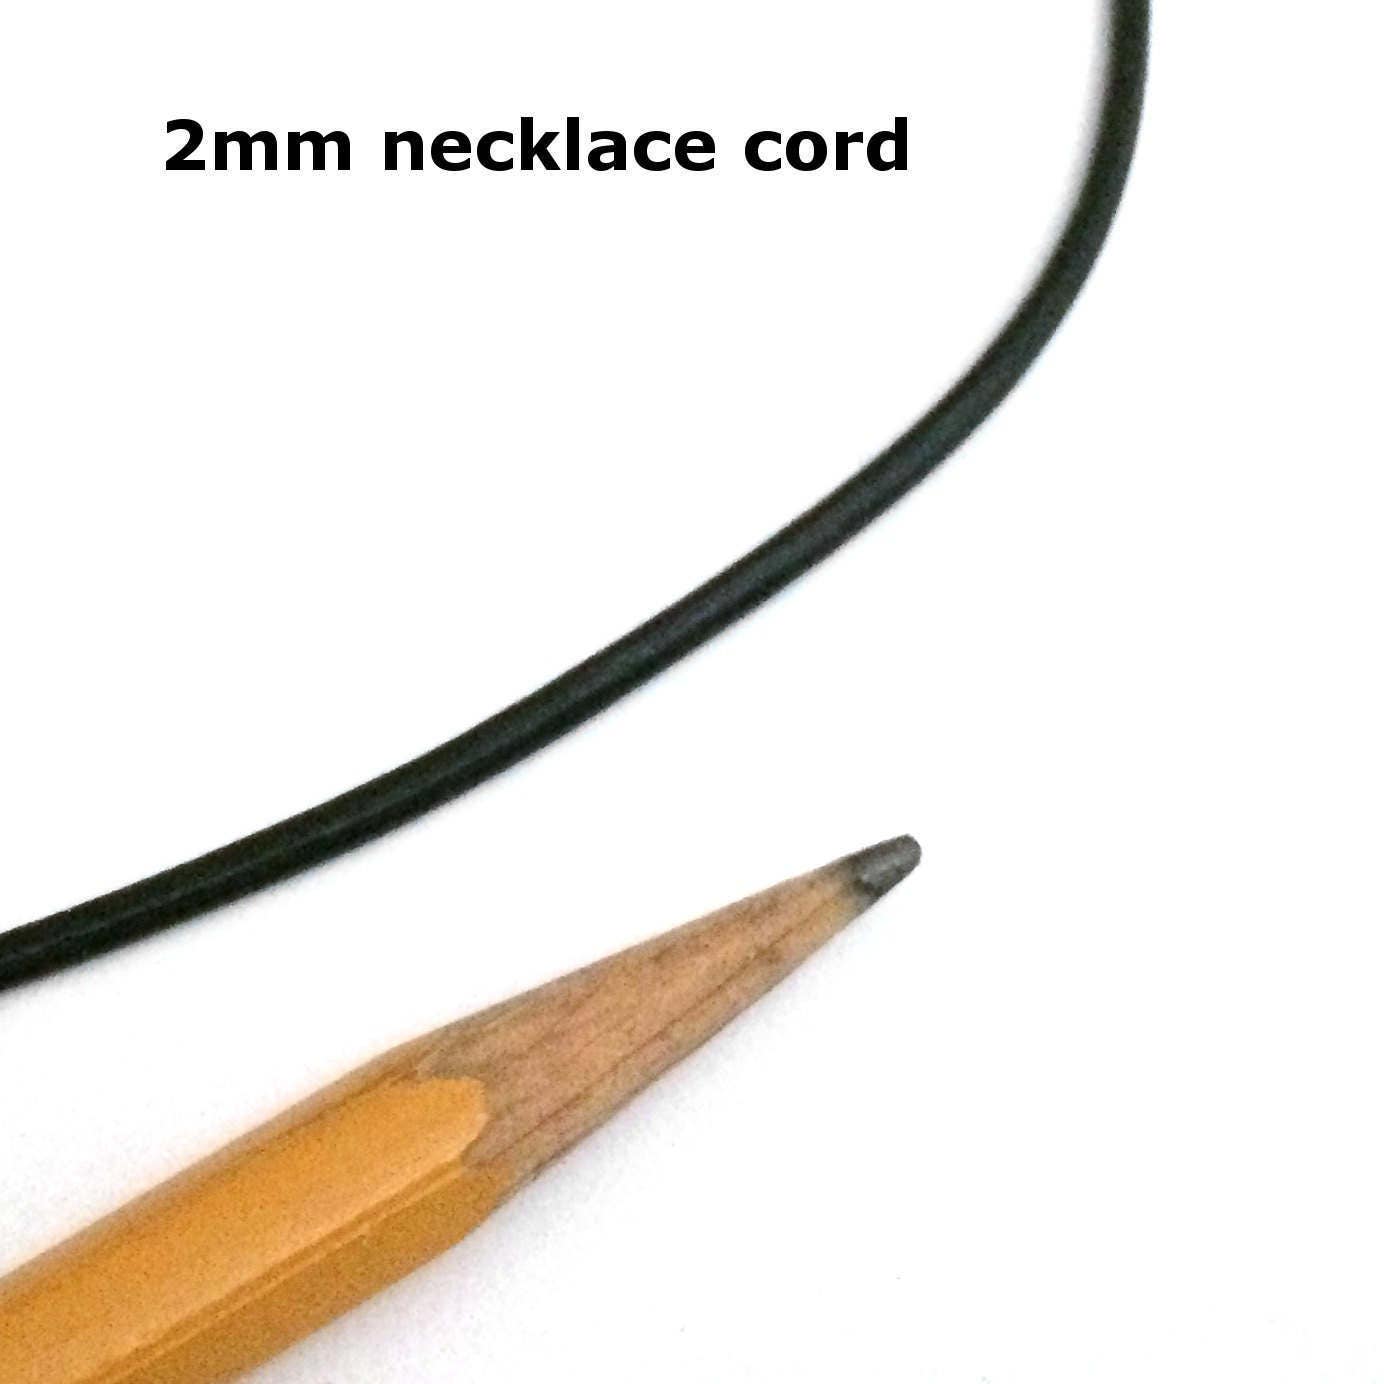 Black Leather Cord Necklace (14 - 30 Inch), 2mm, Stainless Steel Clasp, Plain Necklace Chain, Choker